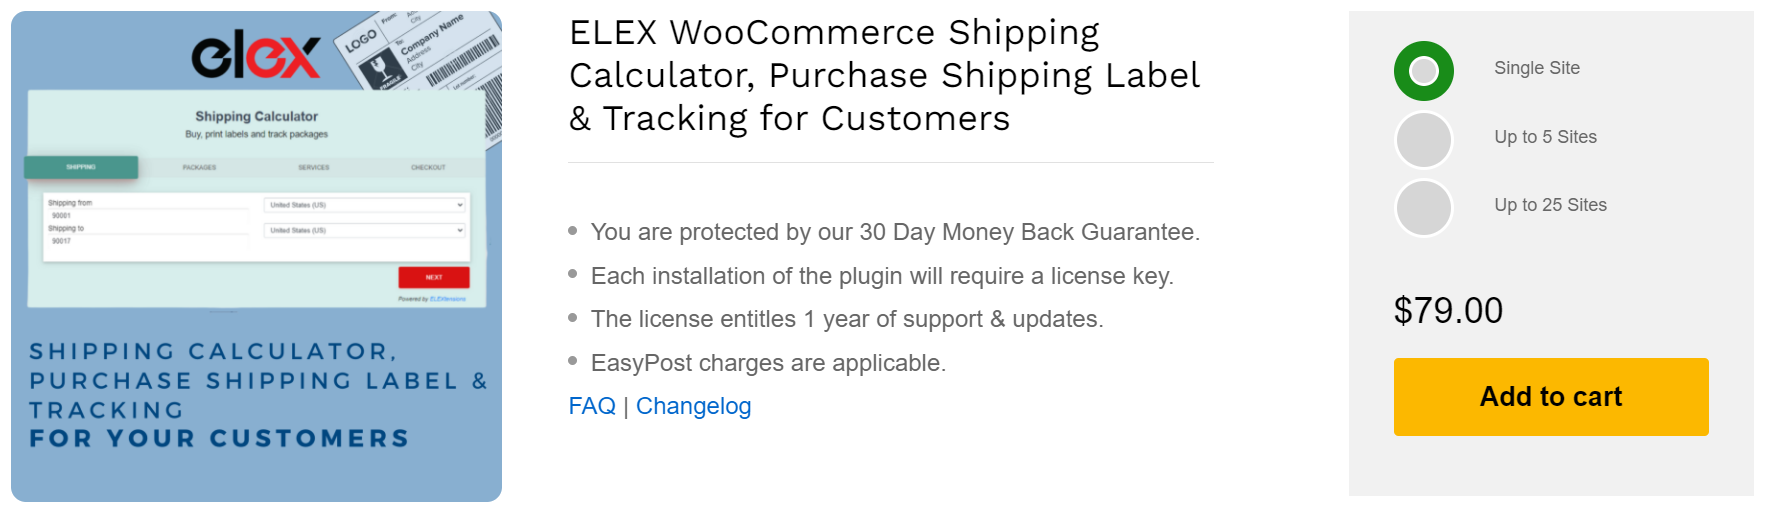 Calculate Shipping Cost with the help of a WooCommerce Shipping Calculator